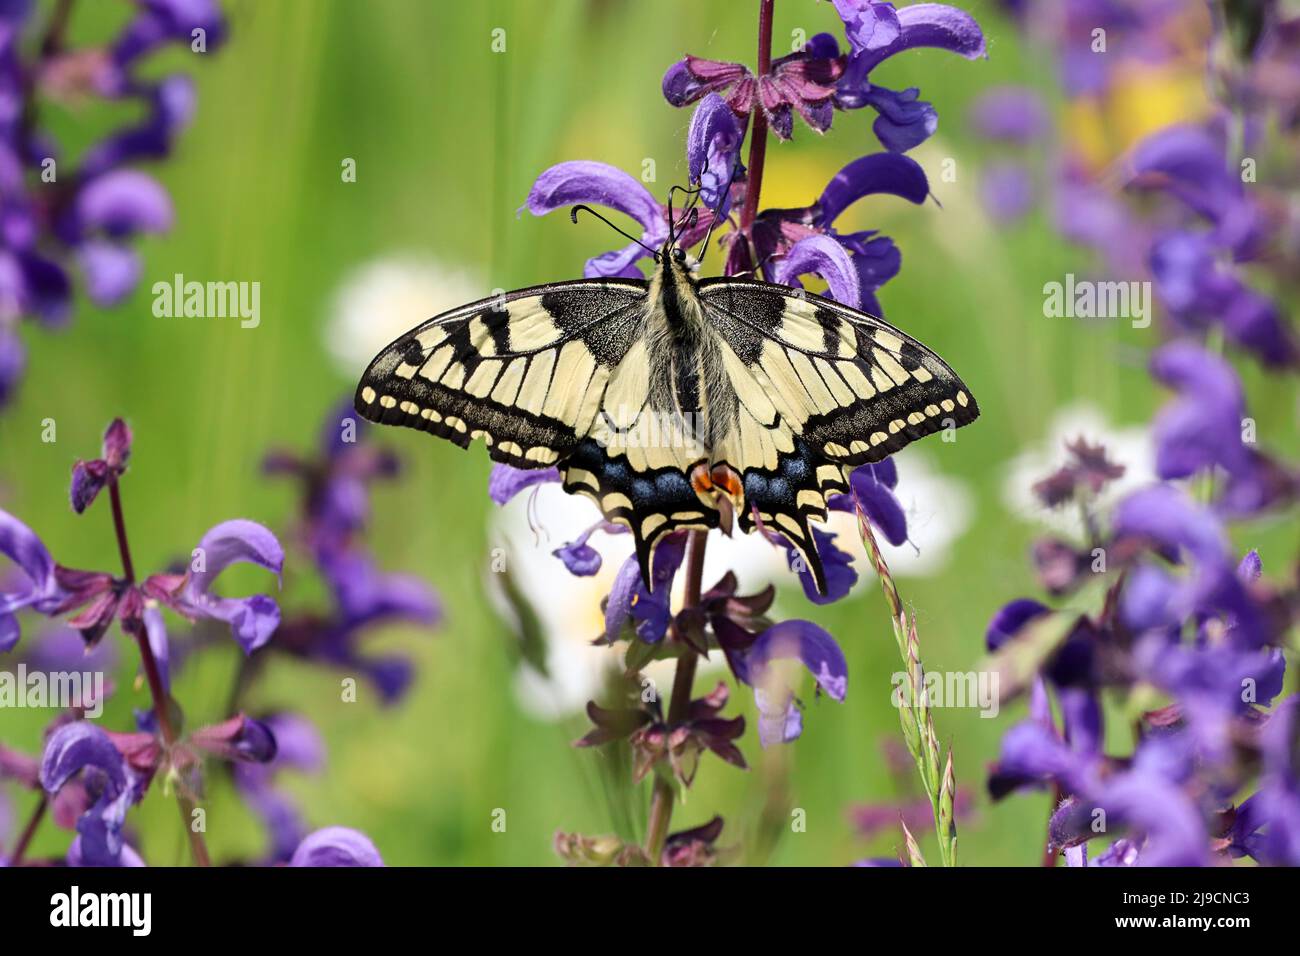 a swallowtail butterfly resting on purple flowers in nature Stock Photo